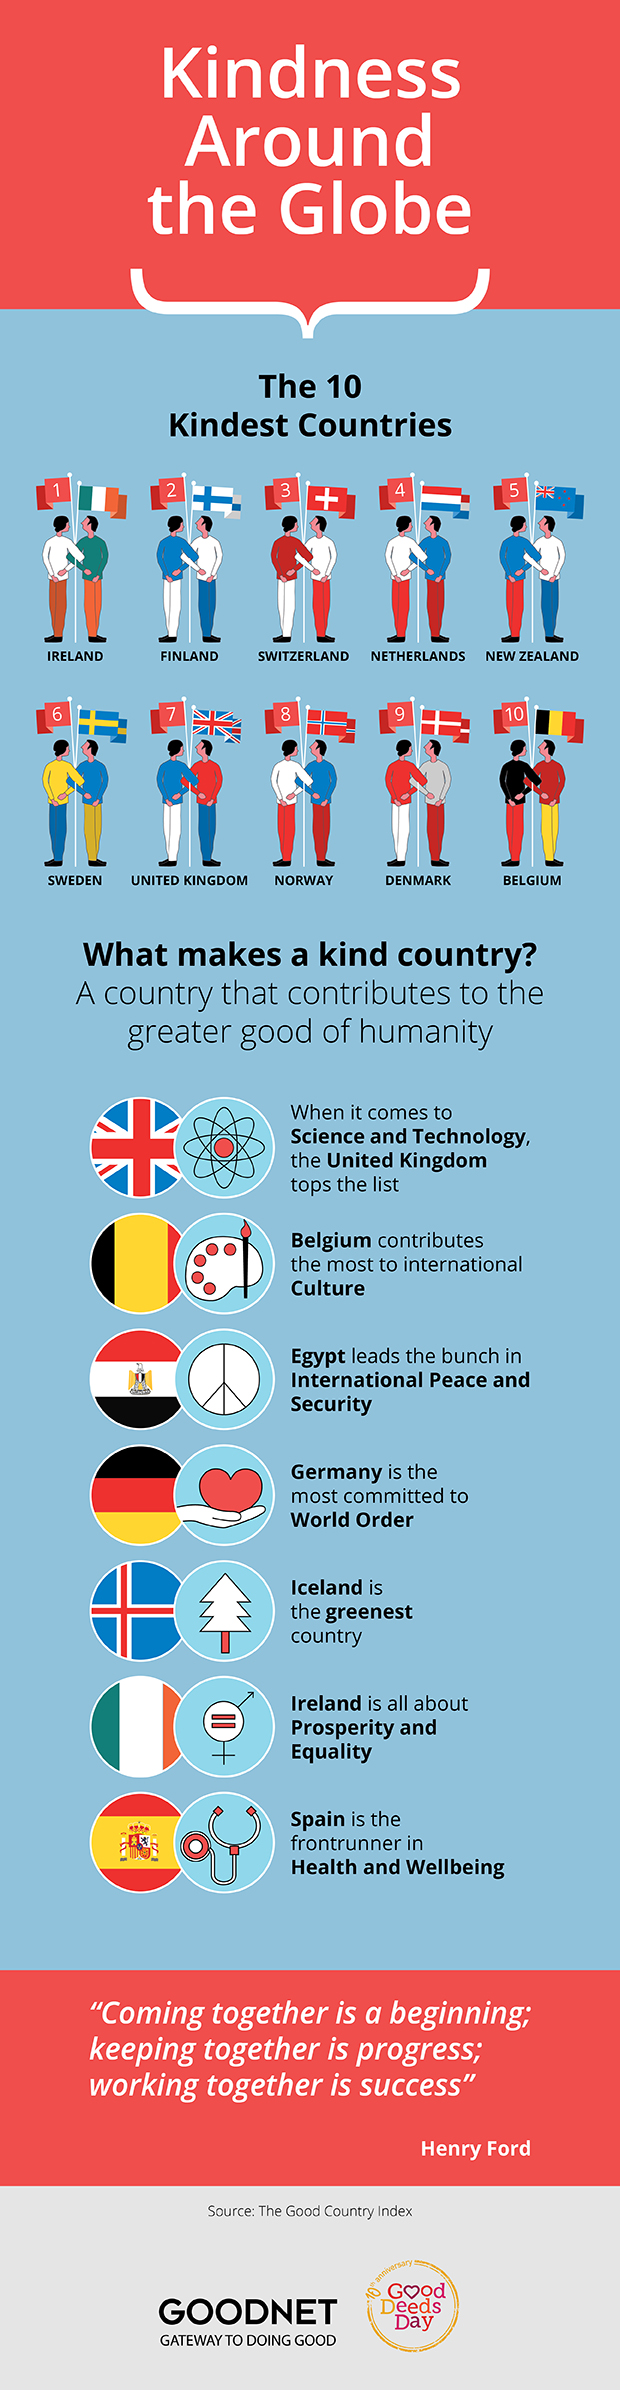 What is the kindest country in the world?